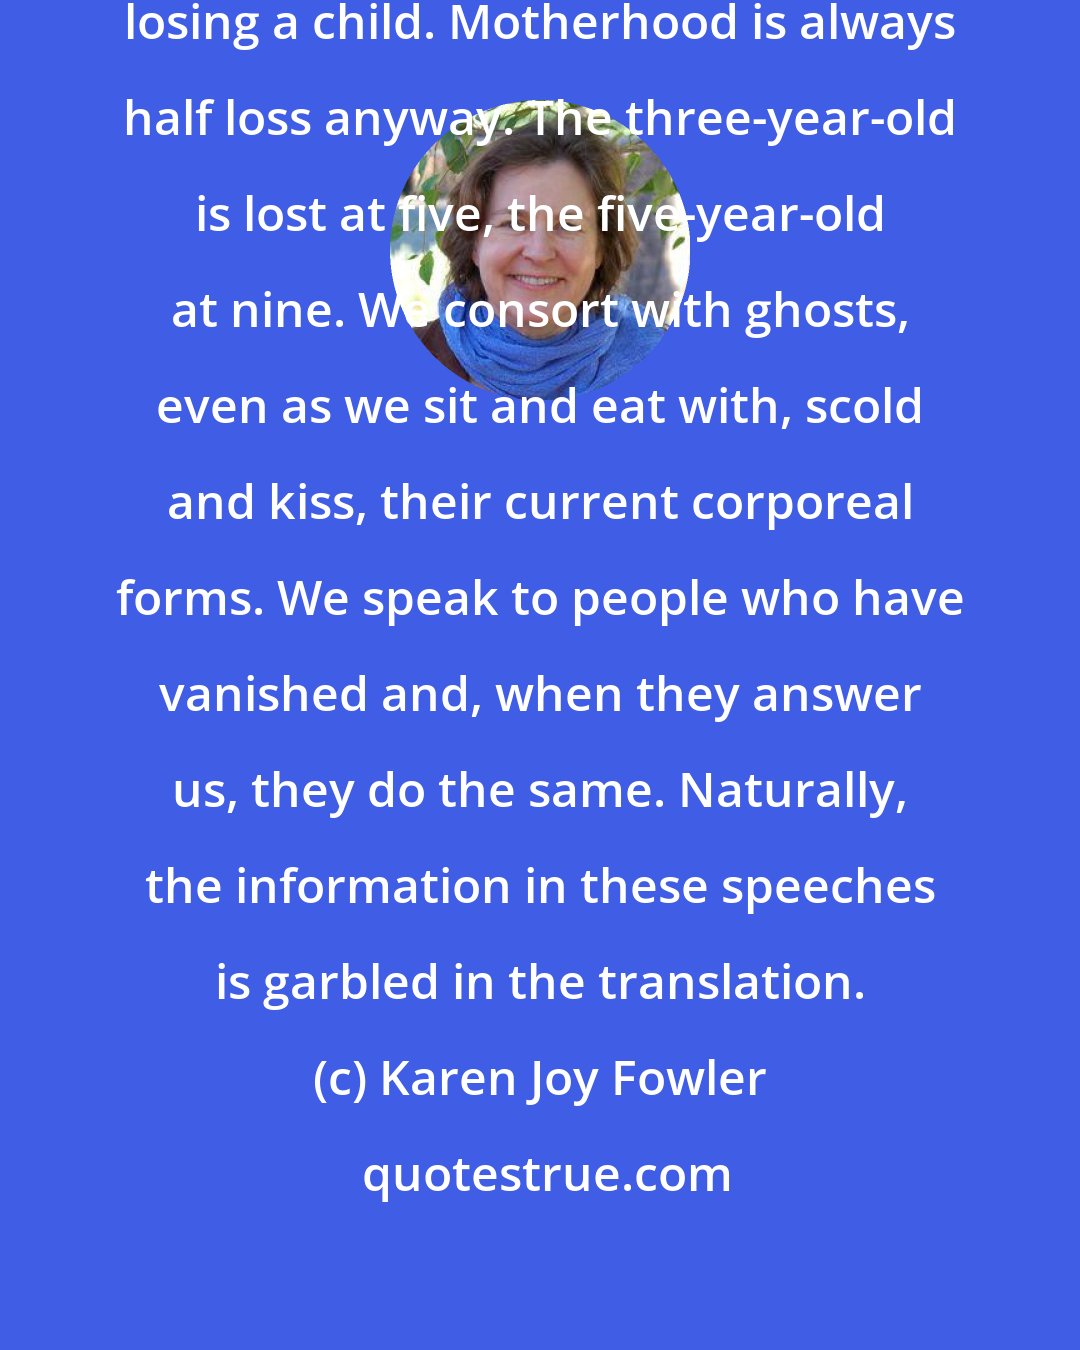 Karen Joy Fowler: Every mother can easily imagine losing a child. Motherhood is always half loss anyway. The three-year-old is lost at five, the five-year-old at nine. We consort with ghosts, even as we sit and eat with, scold and kiss, their current corporeal forms. We speak to people who have vanished and, when they answer us, they do the same. Naturally, the information in these speeches is garbled in the translation.